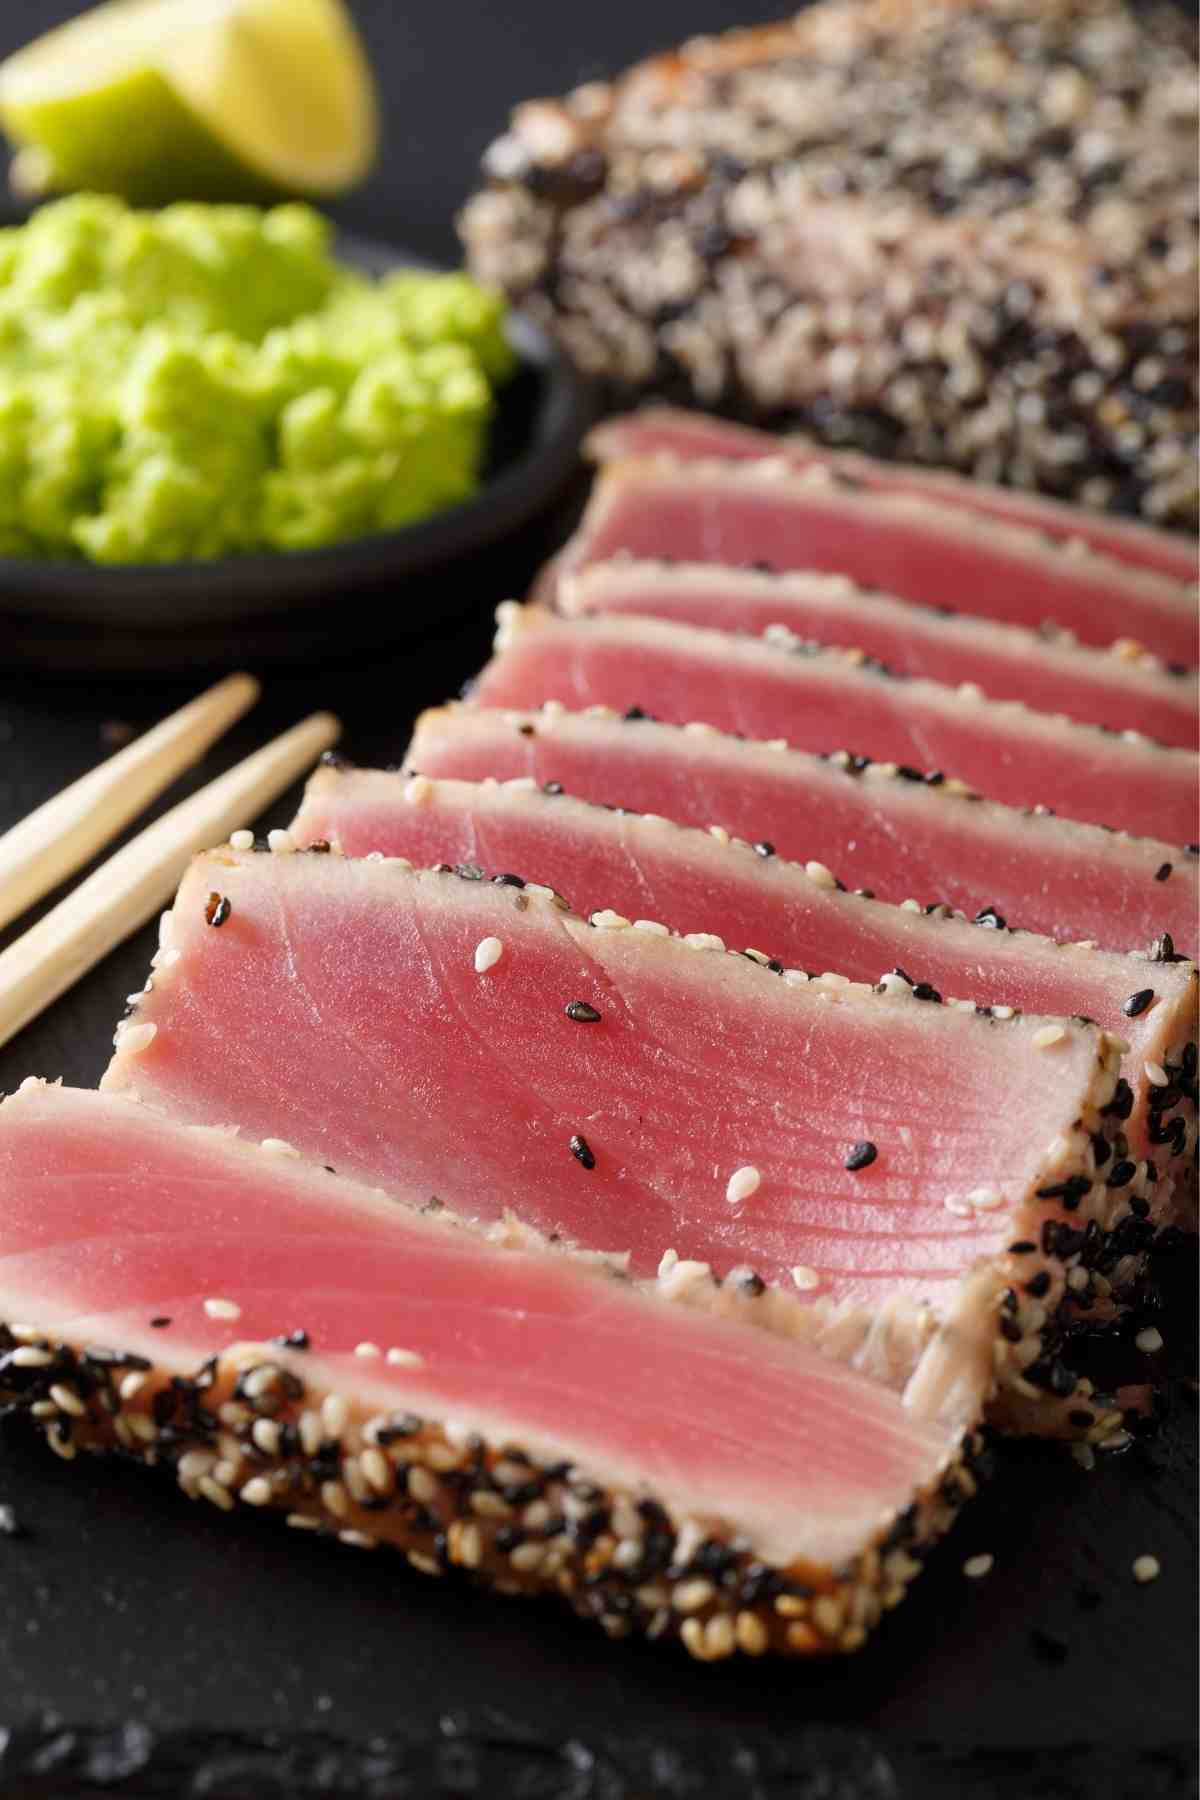 This seared ahi tuna features a delicious sesame seed crust that adds wonderful texture.